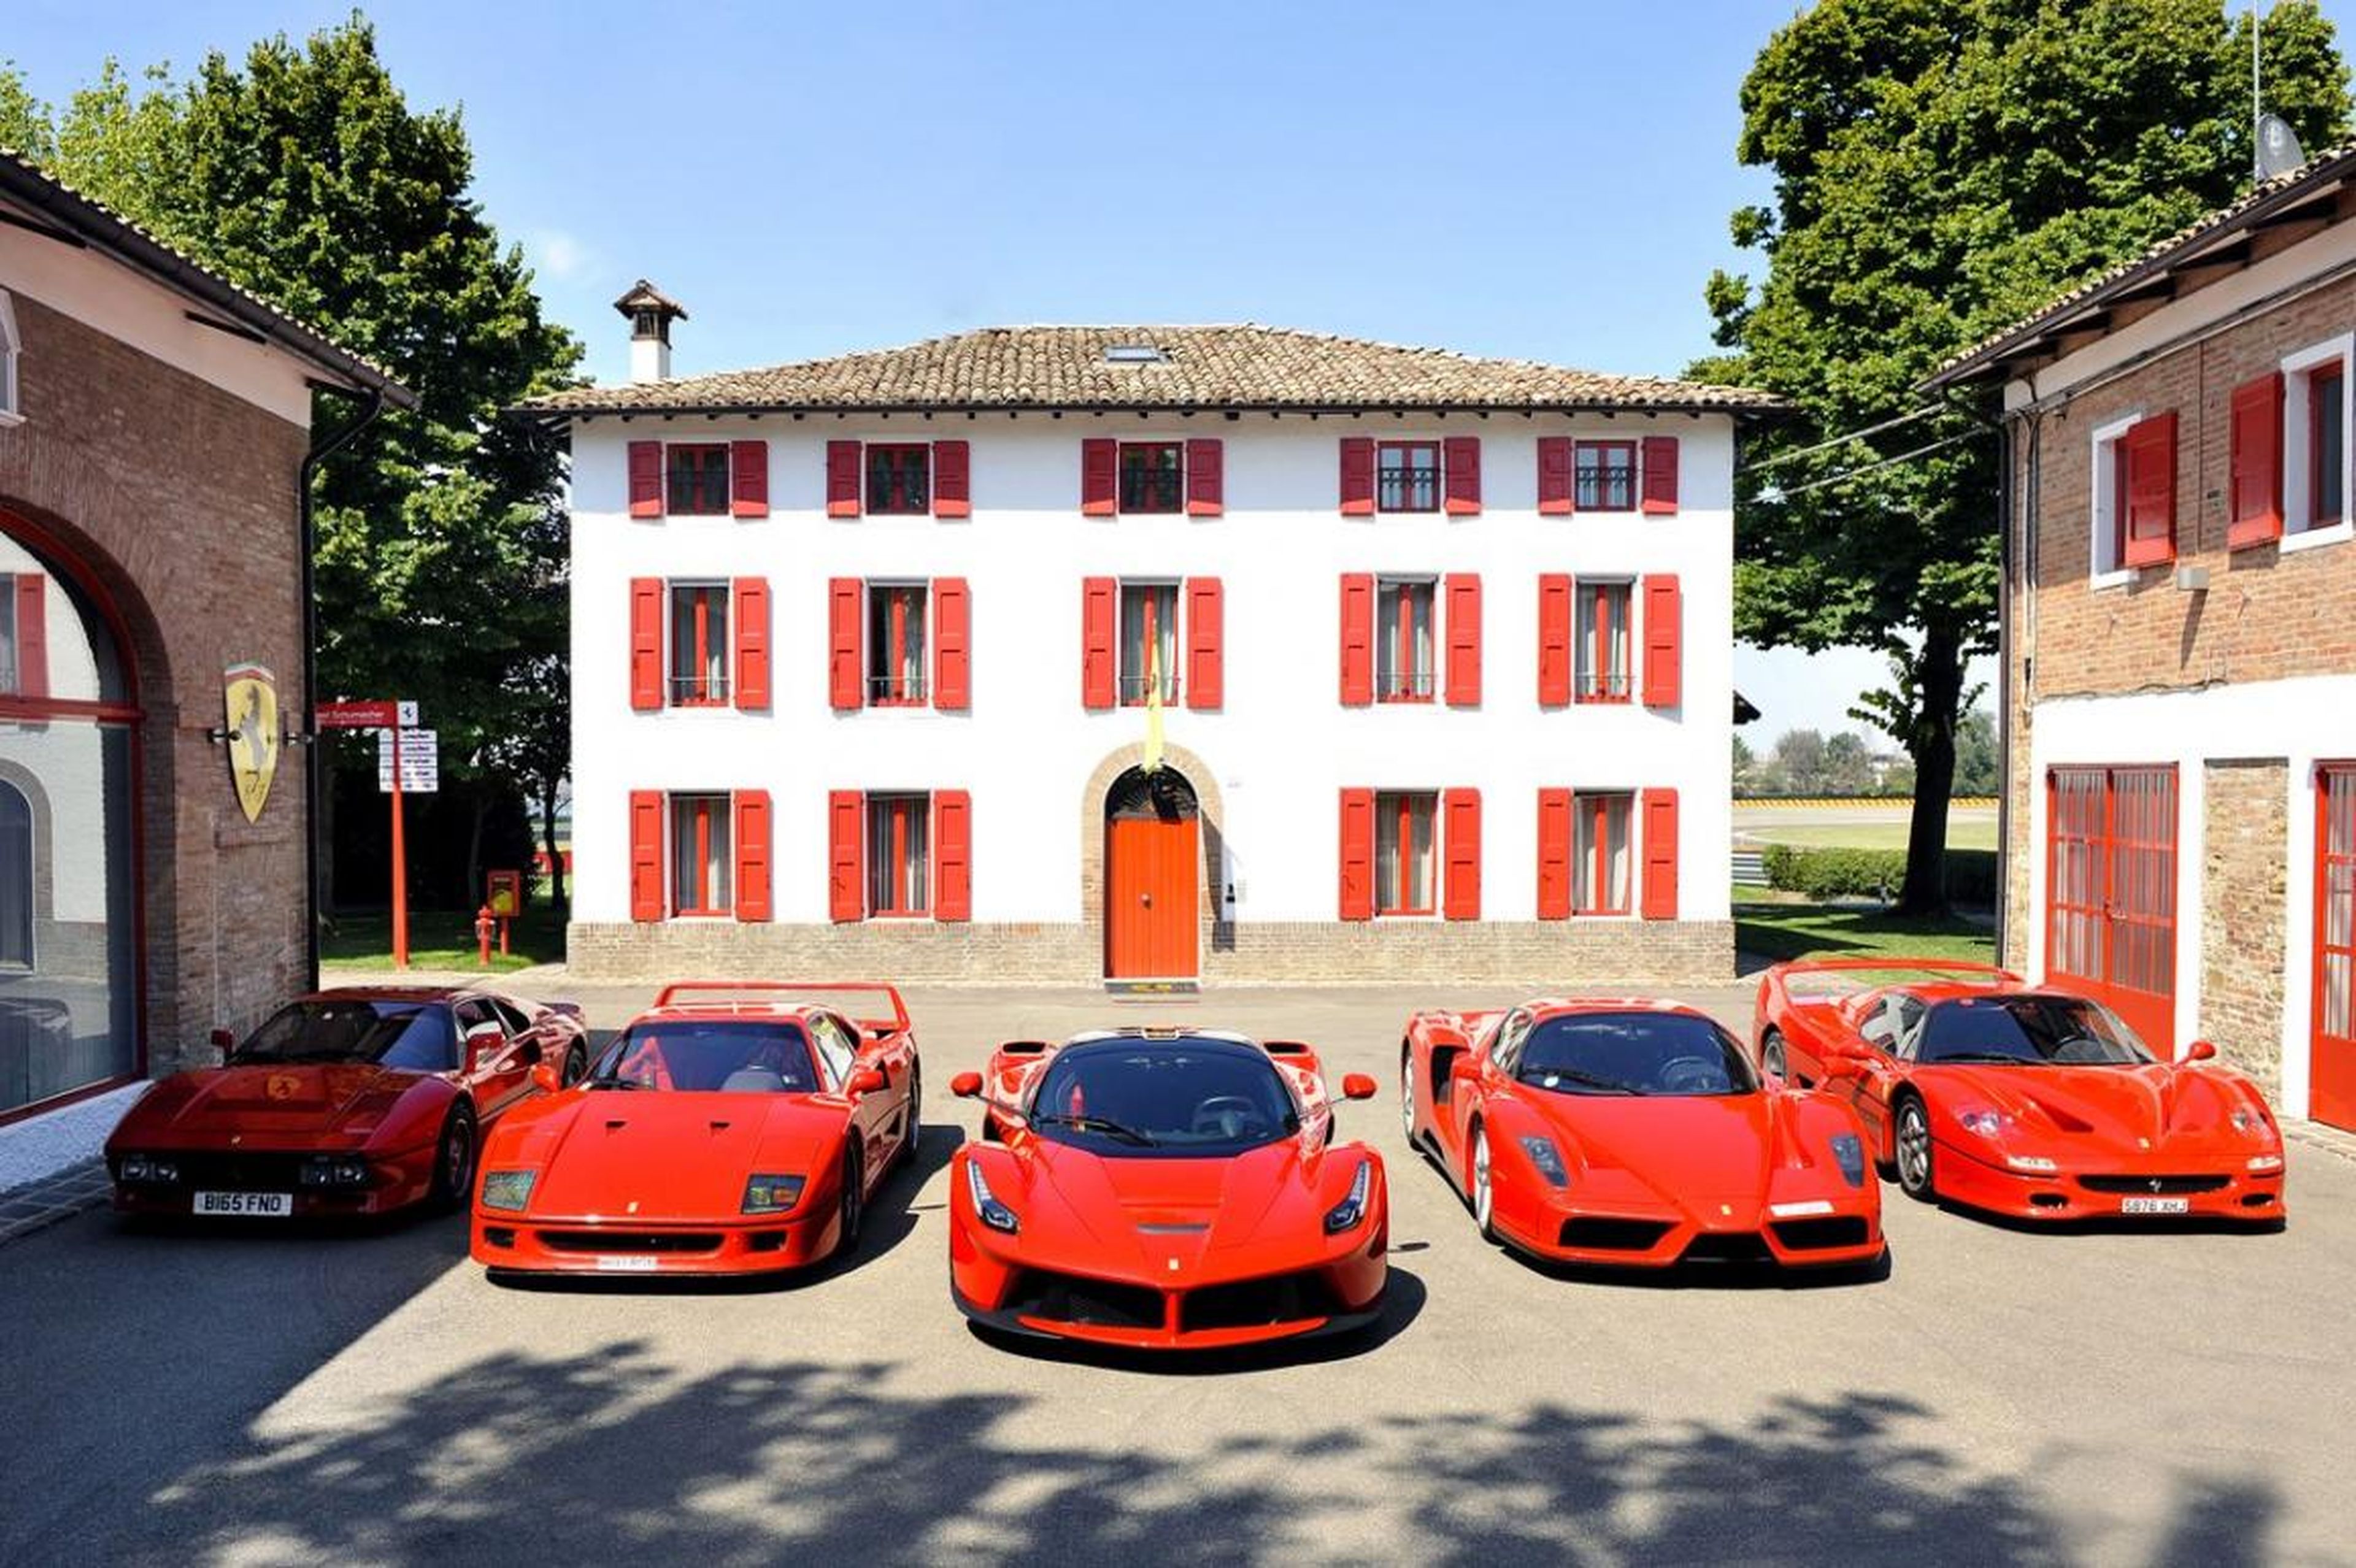 The spectacular story of Ferrari's 7-decade journey from an upstart racing team to a $30 billion-dollar luxury brand